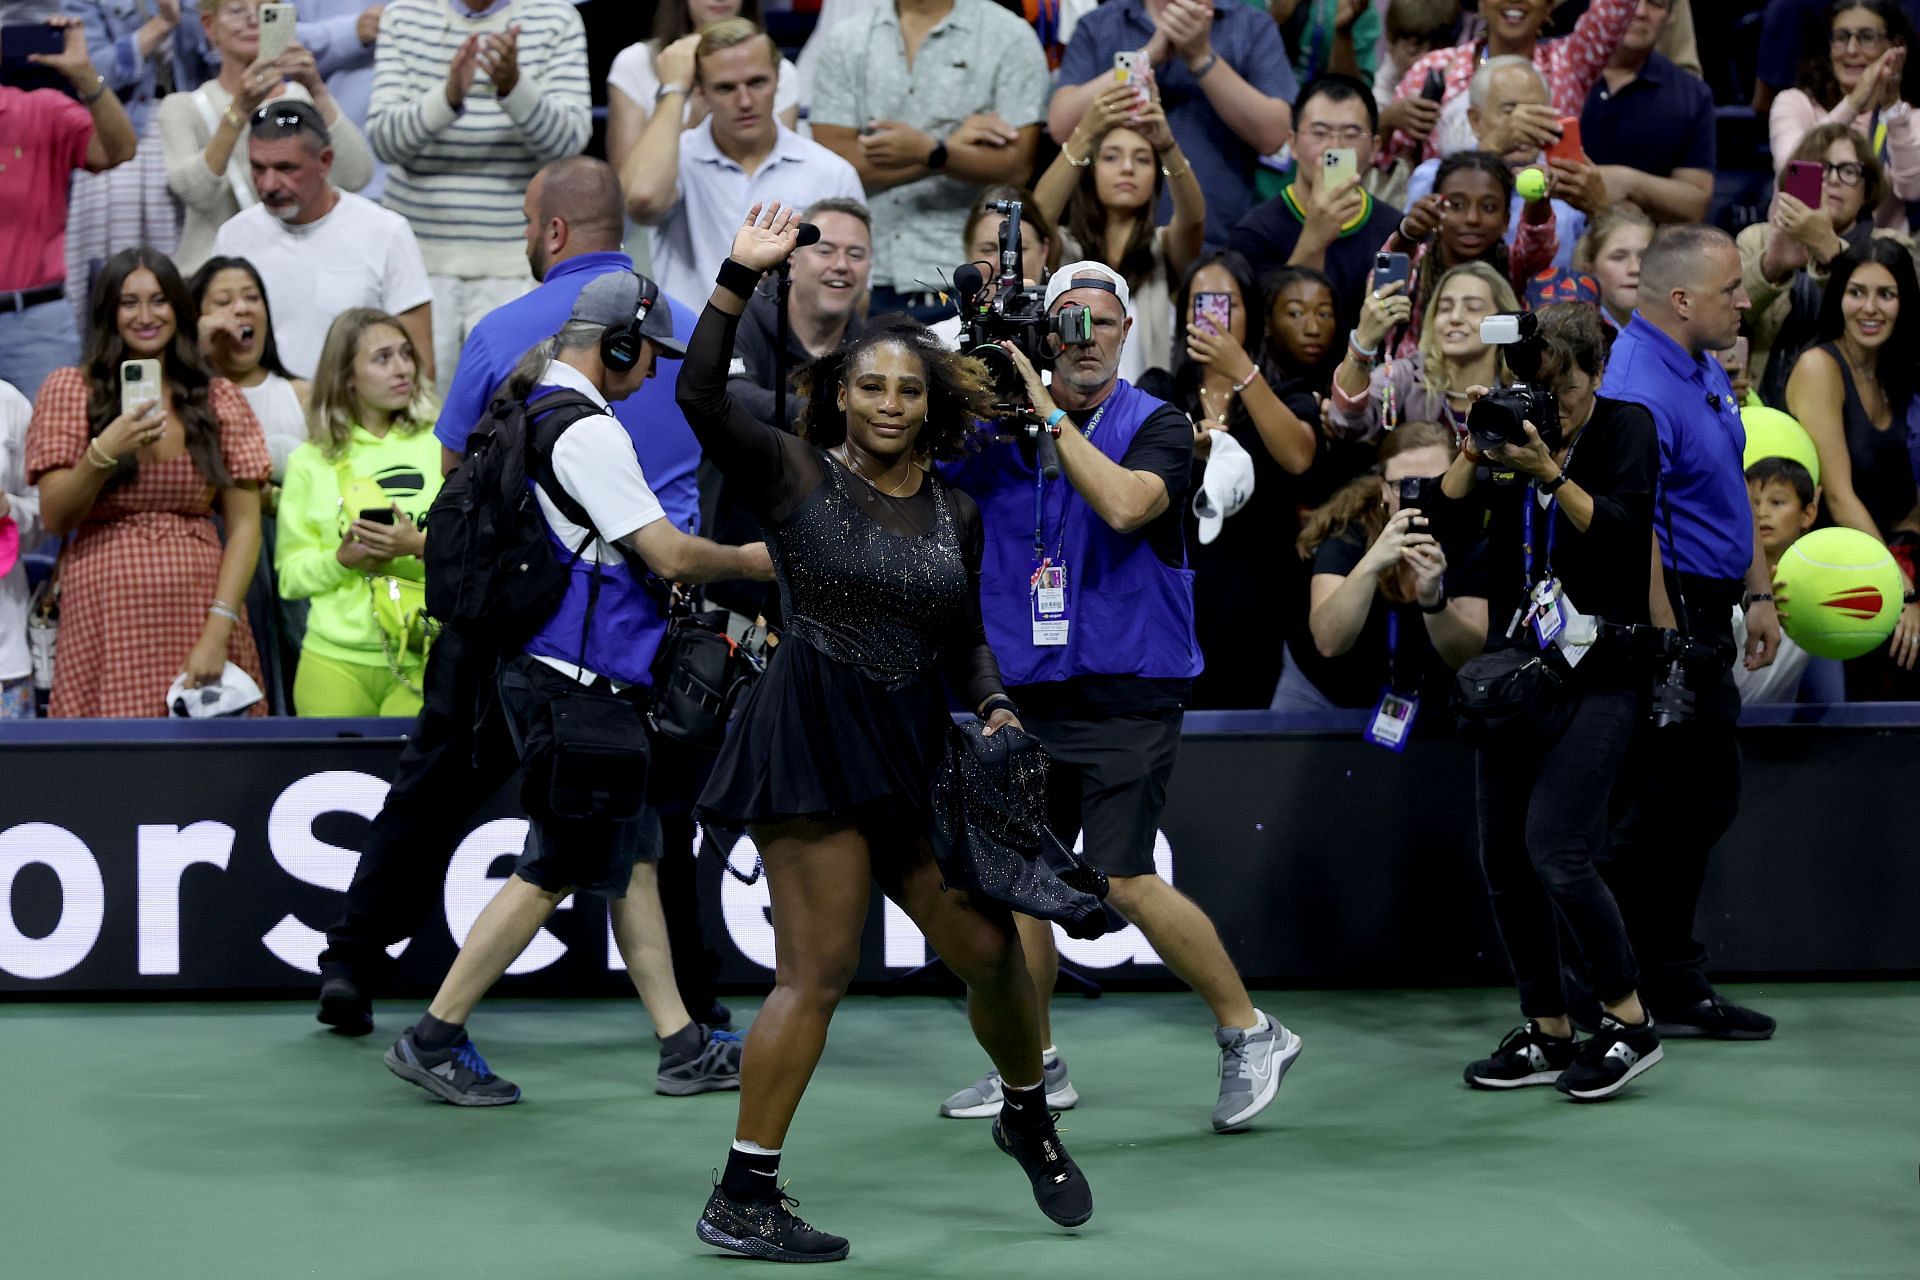 Serena Williams waves to the fans following her 2022 US Open exit.